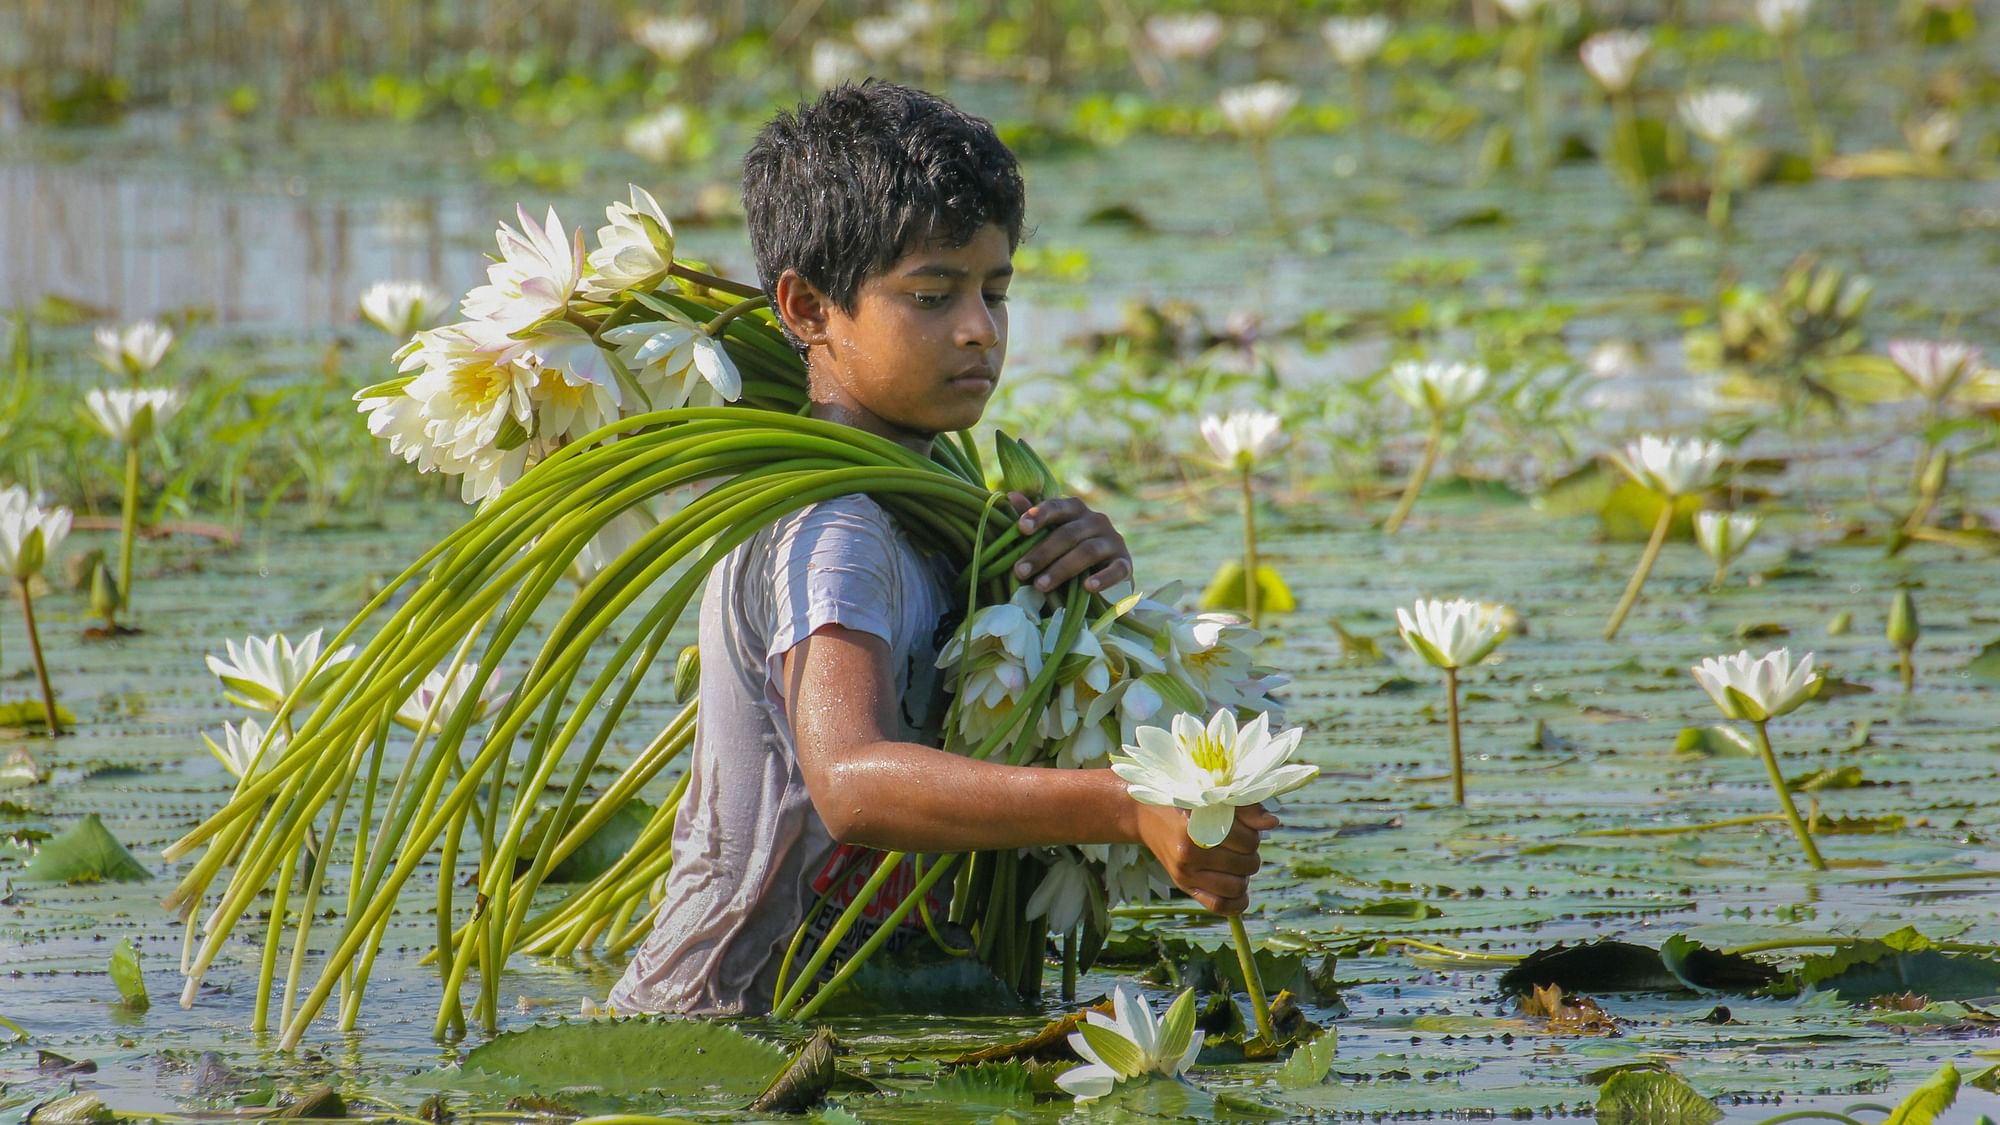 A young boy collects water lilies from a pond, in Nadia district of West Bengal, on Wednesday, 4 September 2019.